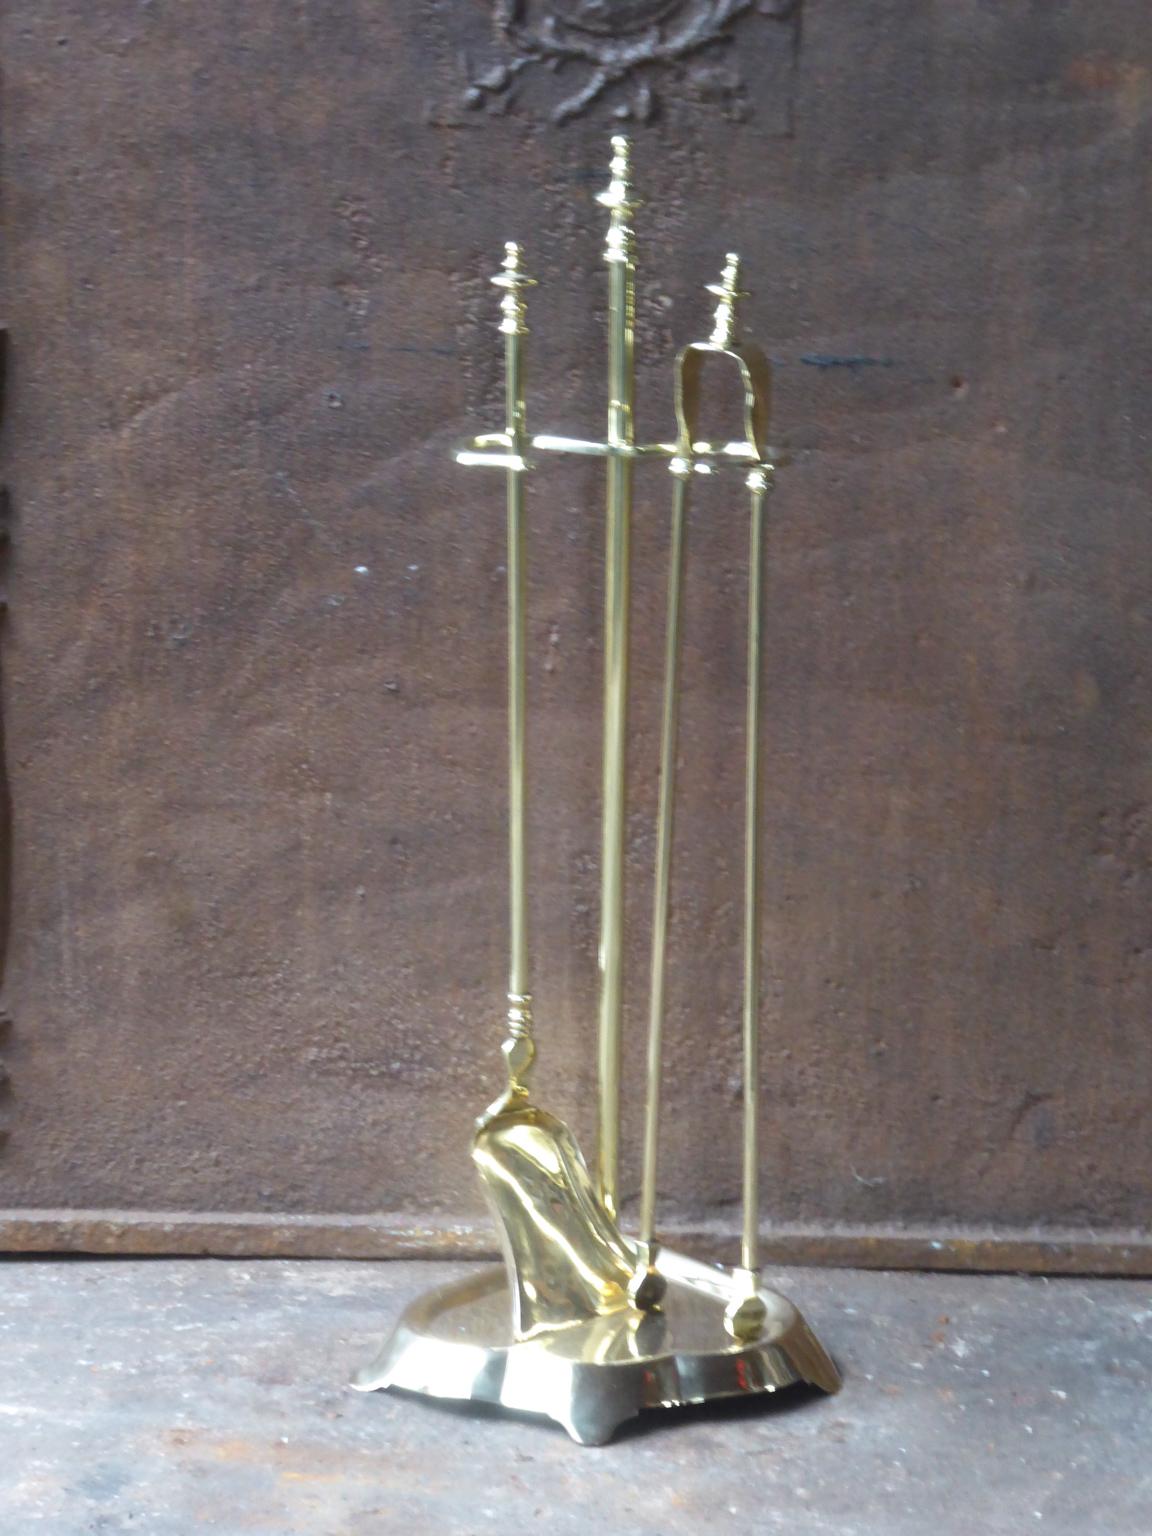 19th-20th century French Napoleon III fireplace tool set made of polished brass. The tool set consists of a stand and two fireplace tools. The condition is good.







  